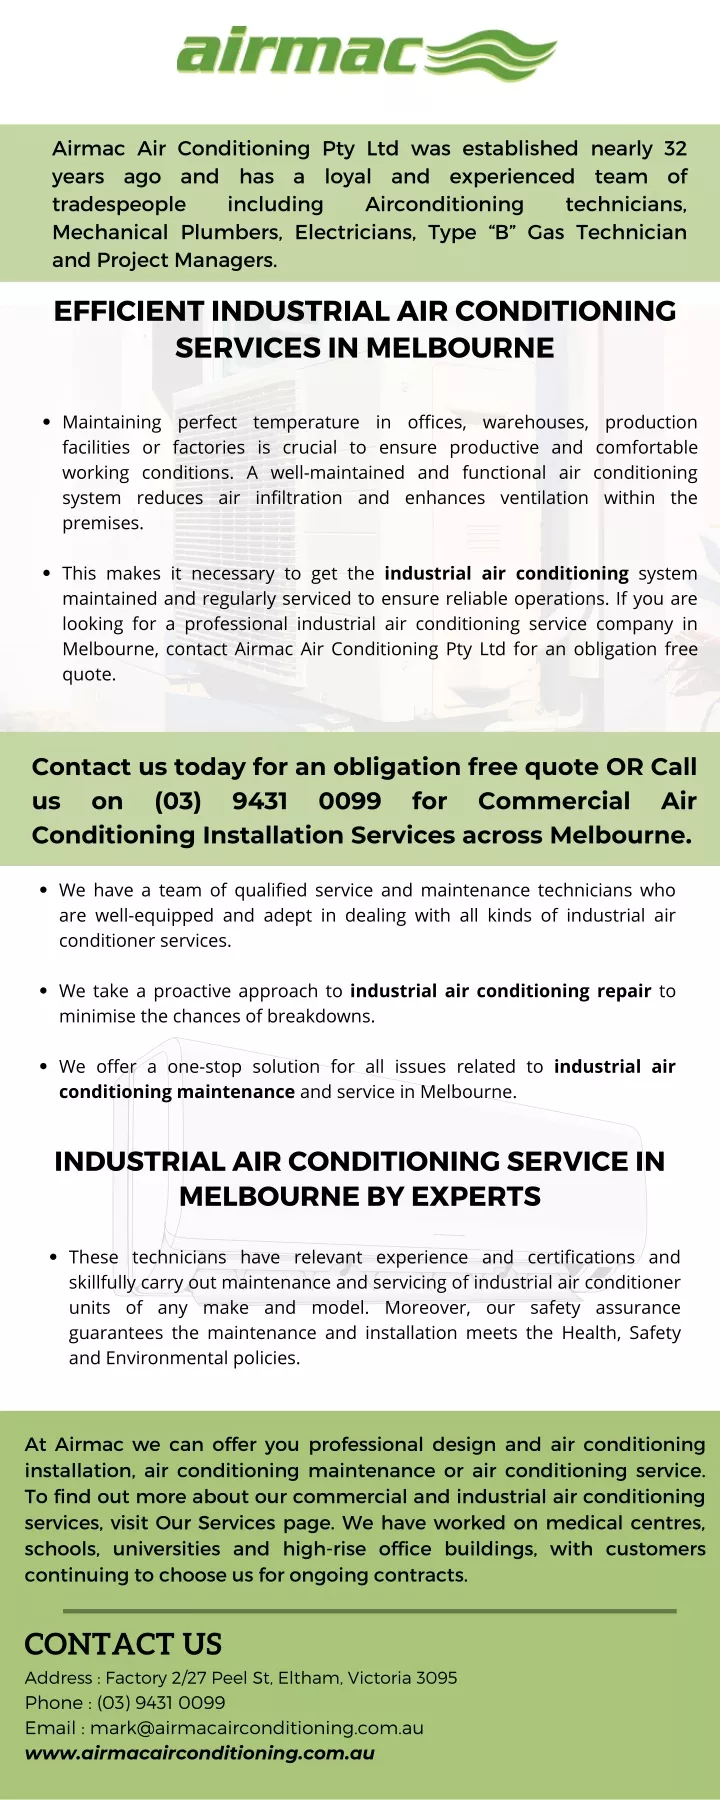 airmac air conditioning pty ltd was established